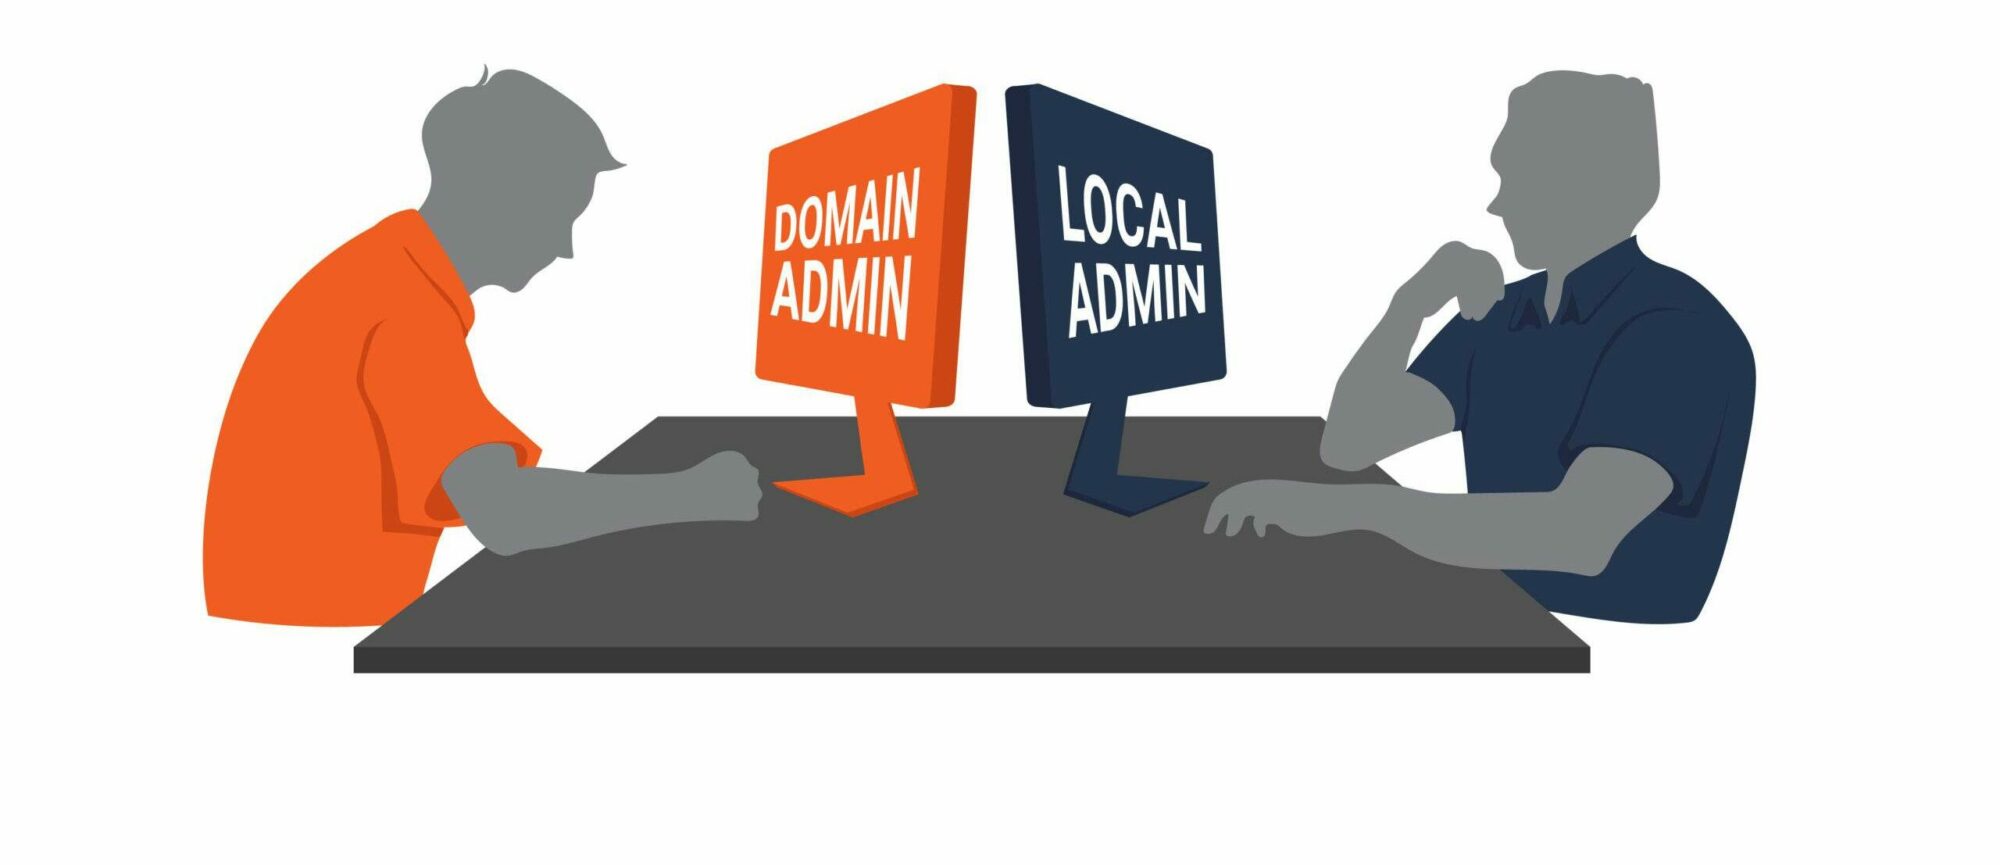 There’s Admin and there’s Admin – Domain Administrators vs Local Administrators